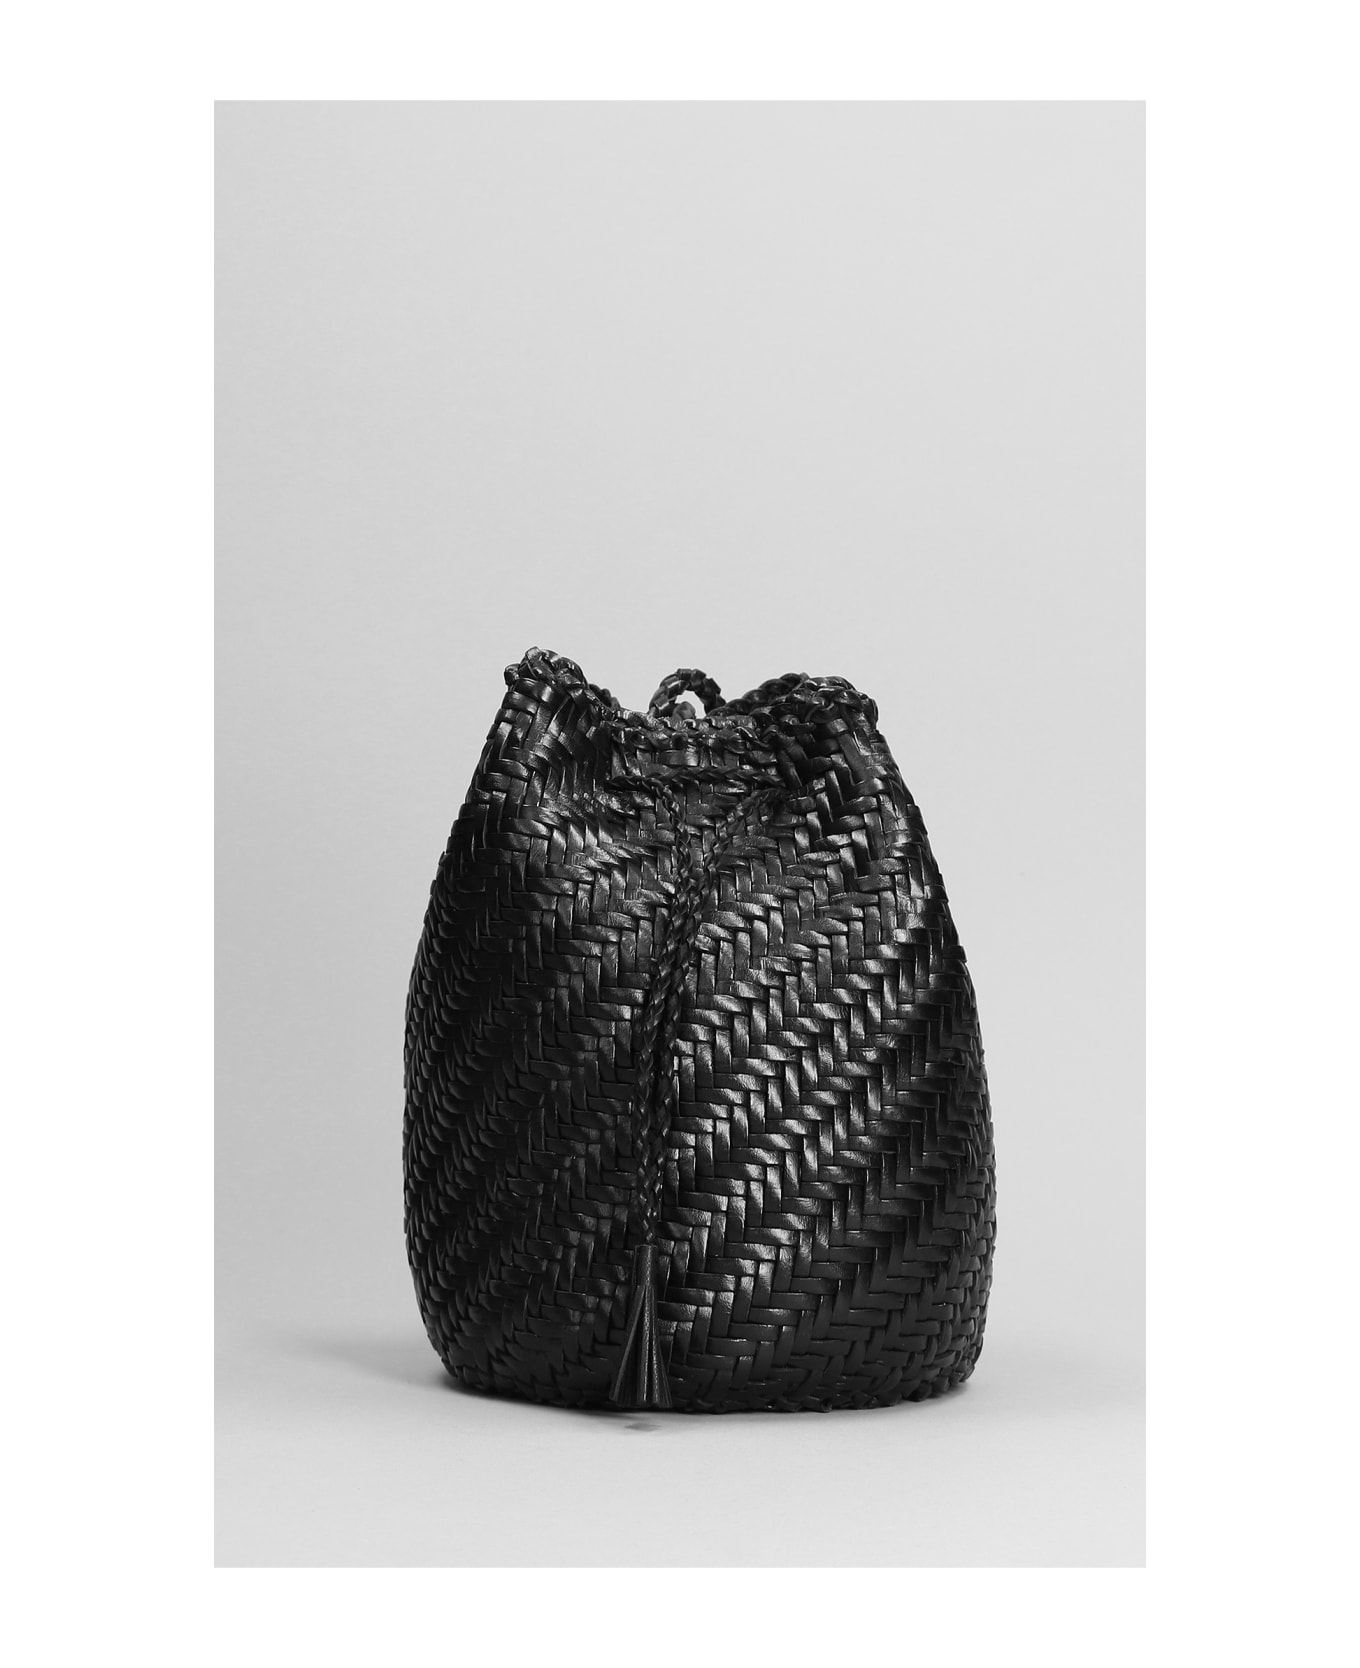 Dragon Diffusion Pompom Double Hand Bag In Black Leather - black